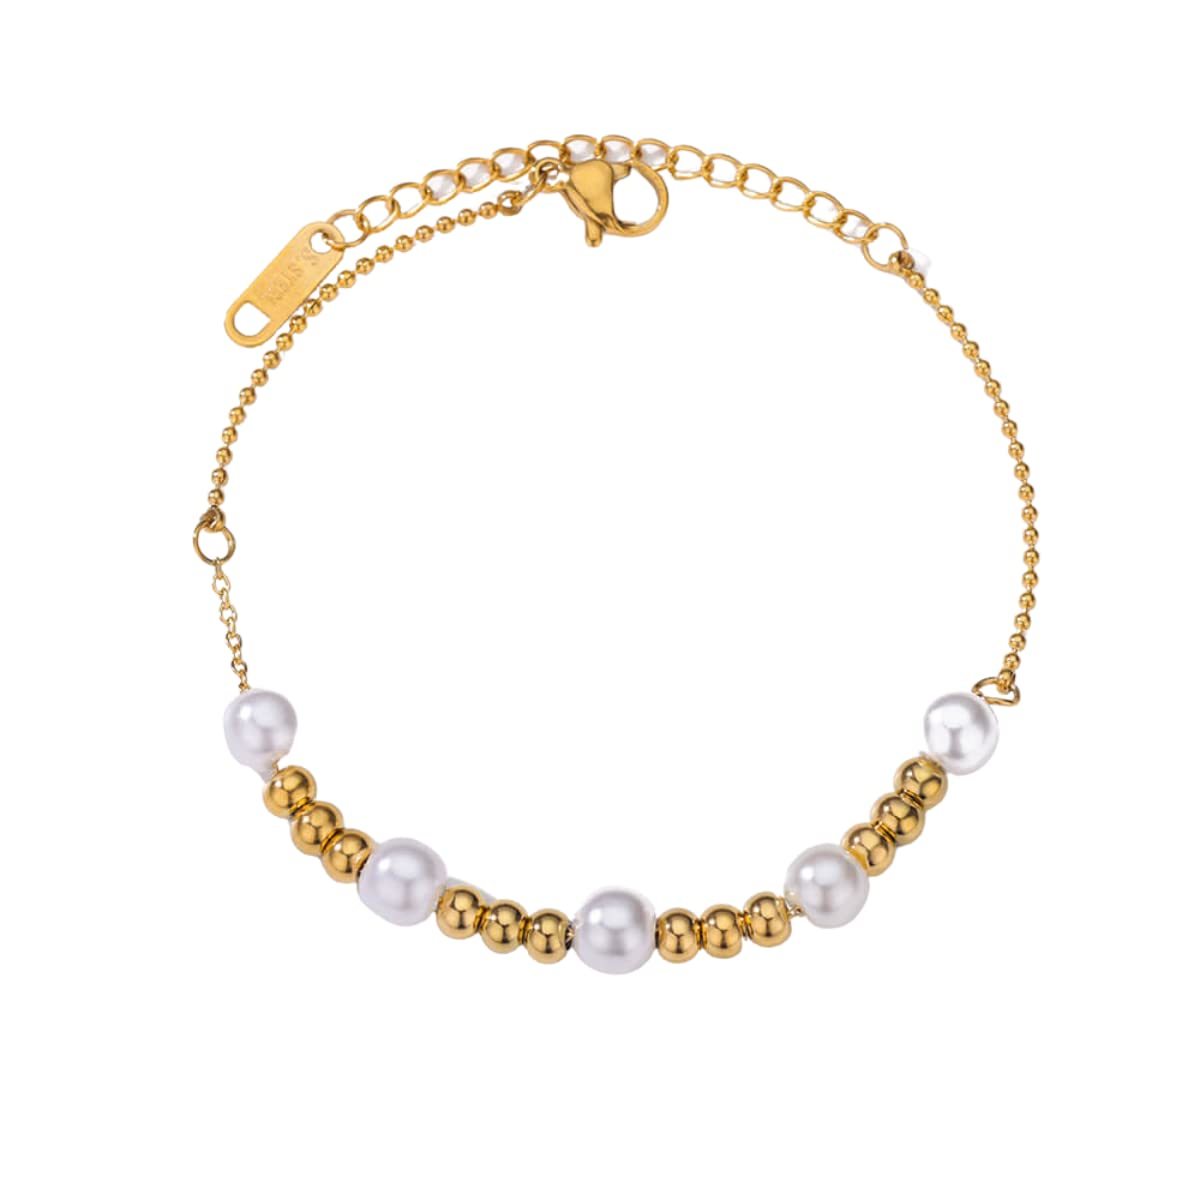 Fashion Bead Pearl Bracelets For Women Stainless Steel Gold Color Bead Chain Bra - $28.00